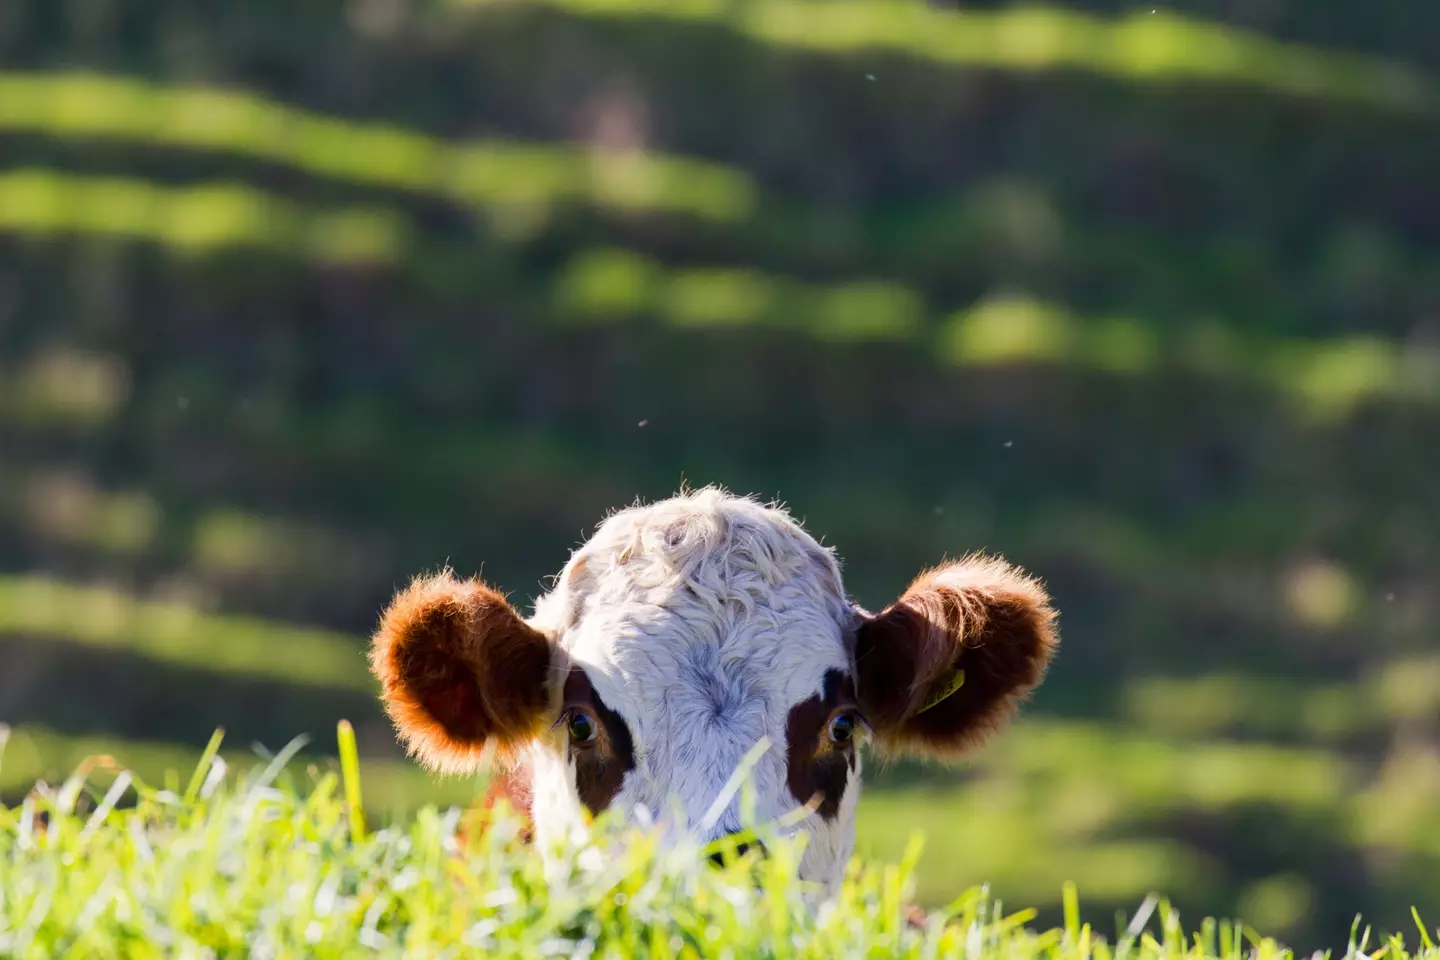 This cow is hiding from the 'burp tax', probably.